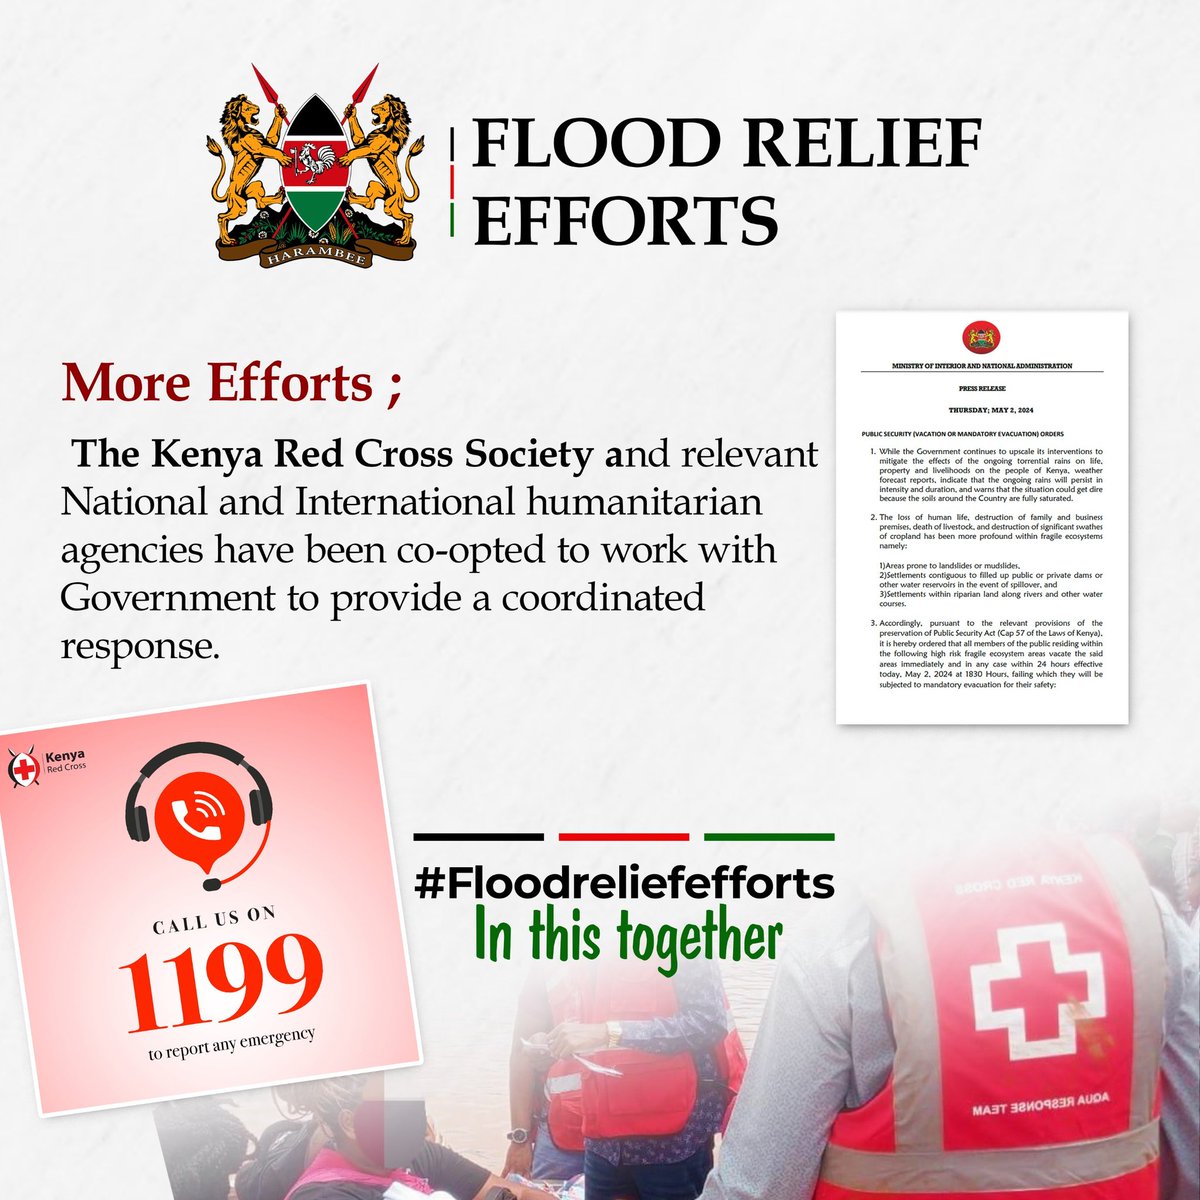 deliberate on extra measures to mitigate the devastating effects of flooding, mudslides and landslides in many parts of the country.
#FloodReliefEfforts
In It Together